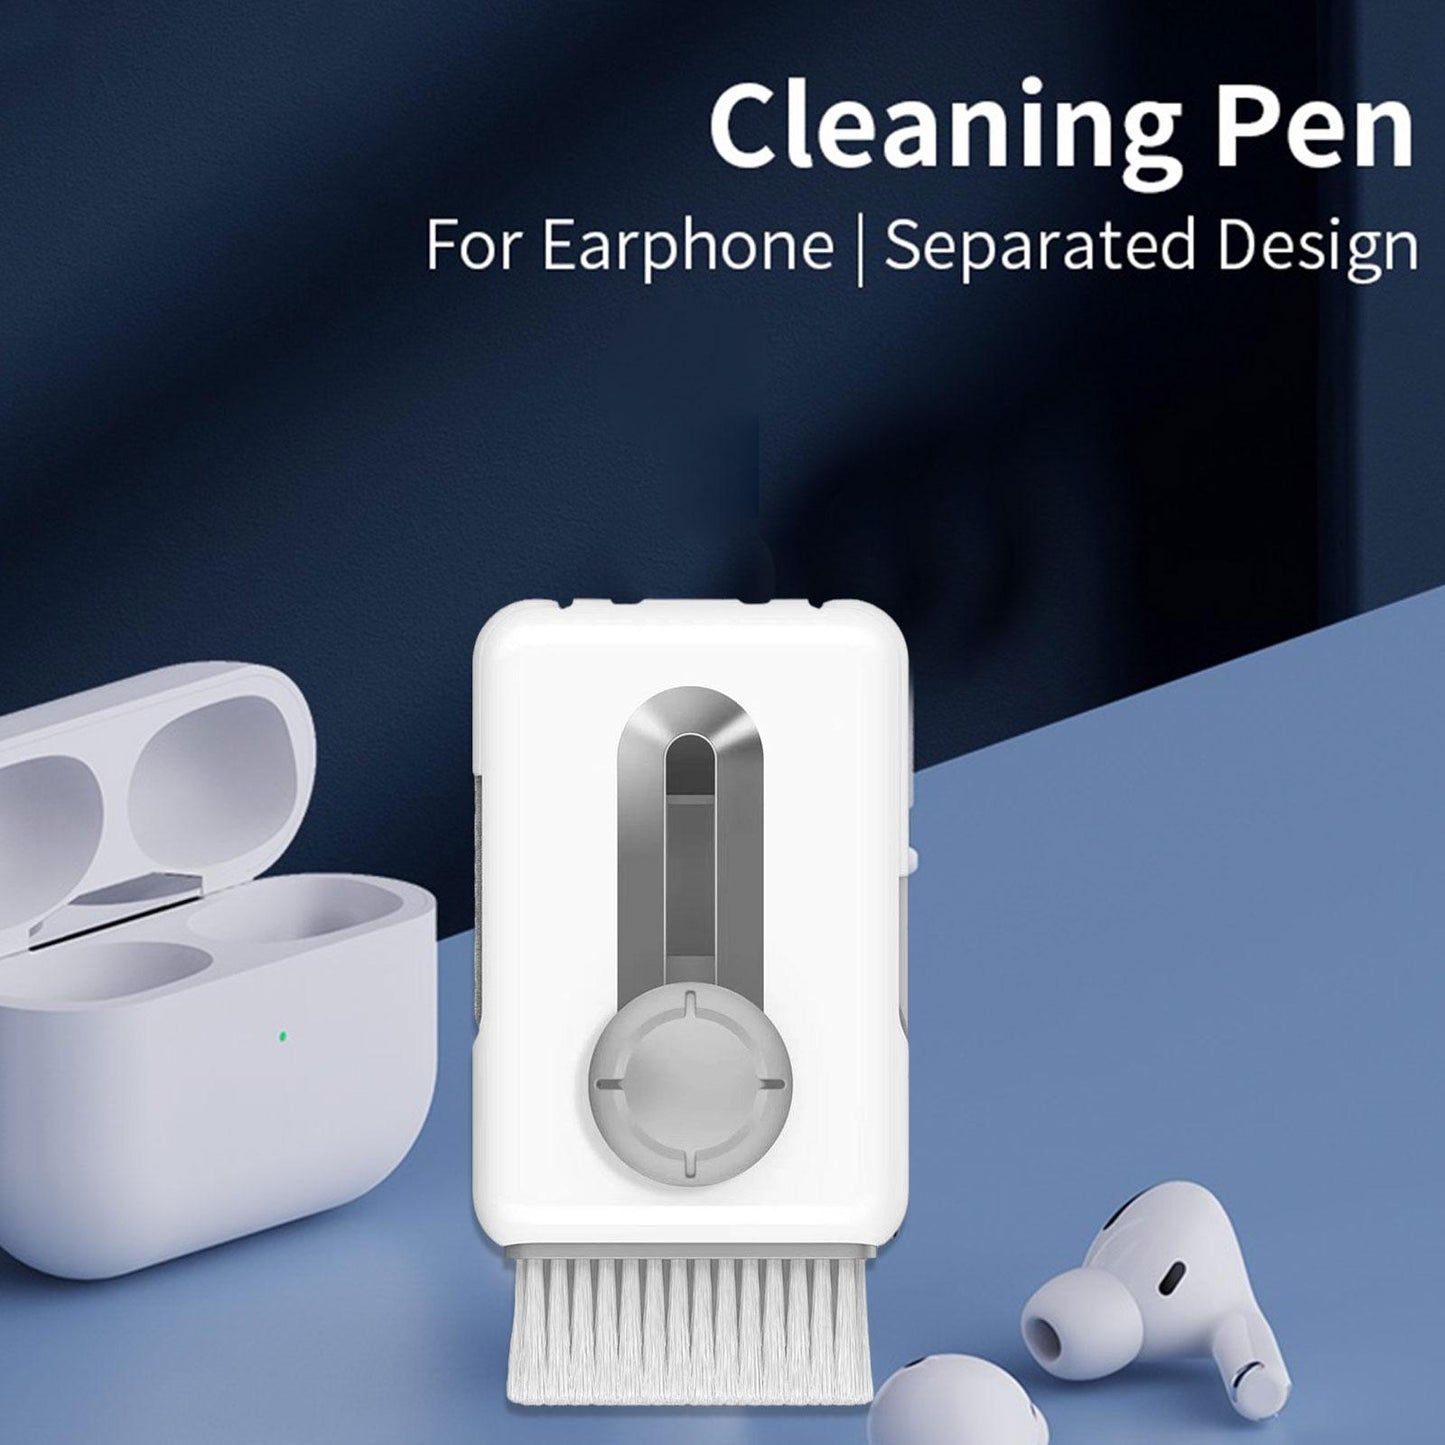 6 In 1 Cleaner Kit For Airpods Earphone Cleaning Pen For Keyboard Notebook Earbuds Case Cleaning Tools Car Dashboard Clean Brush